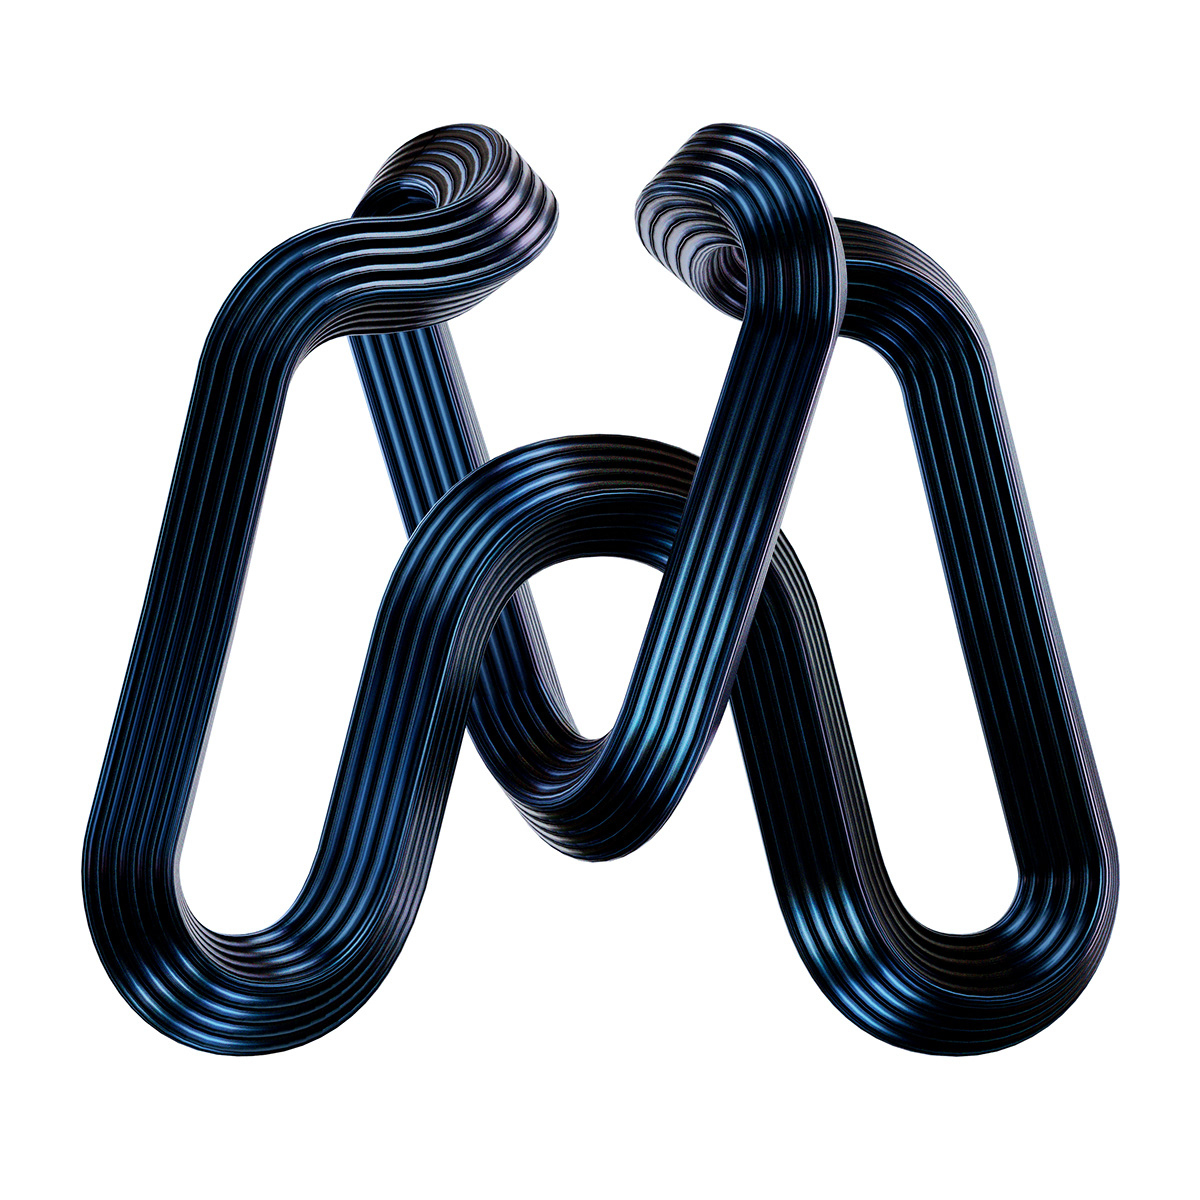 36days 36daysoftype 3D 3DType alphabets letters numbers octane singapore ufho